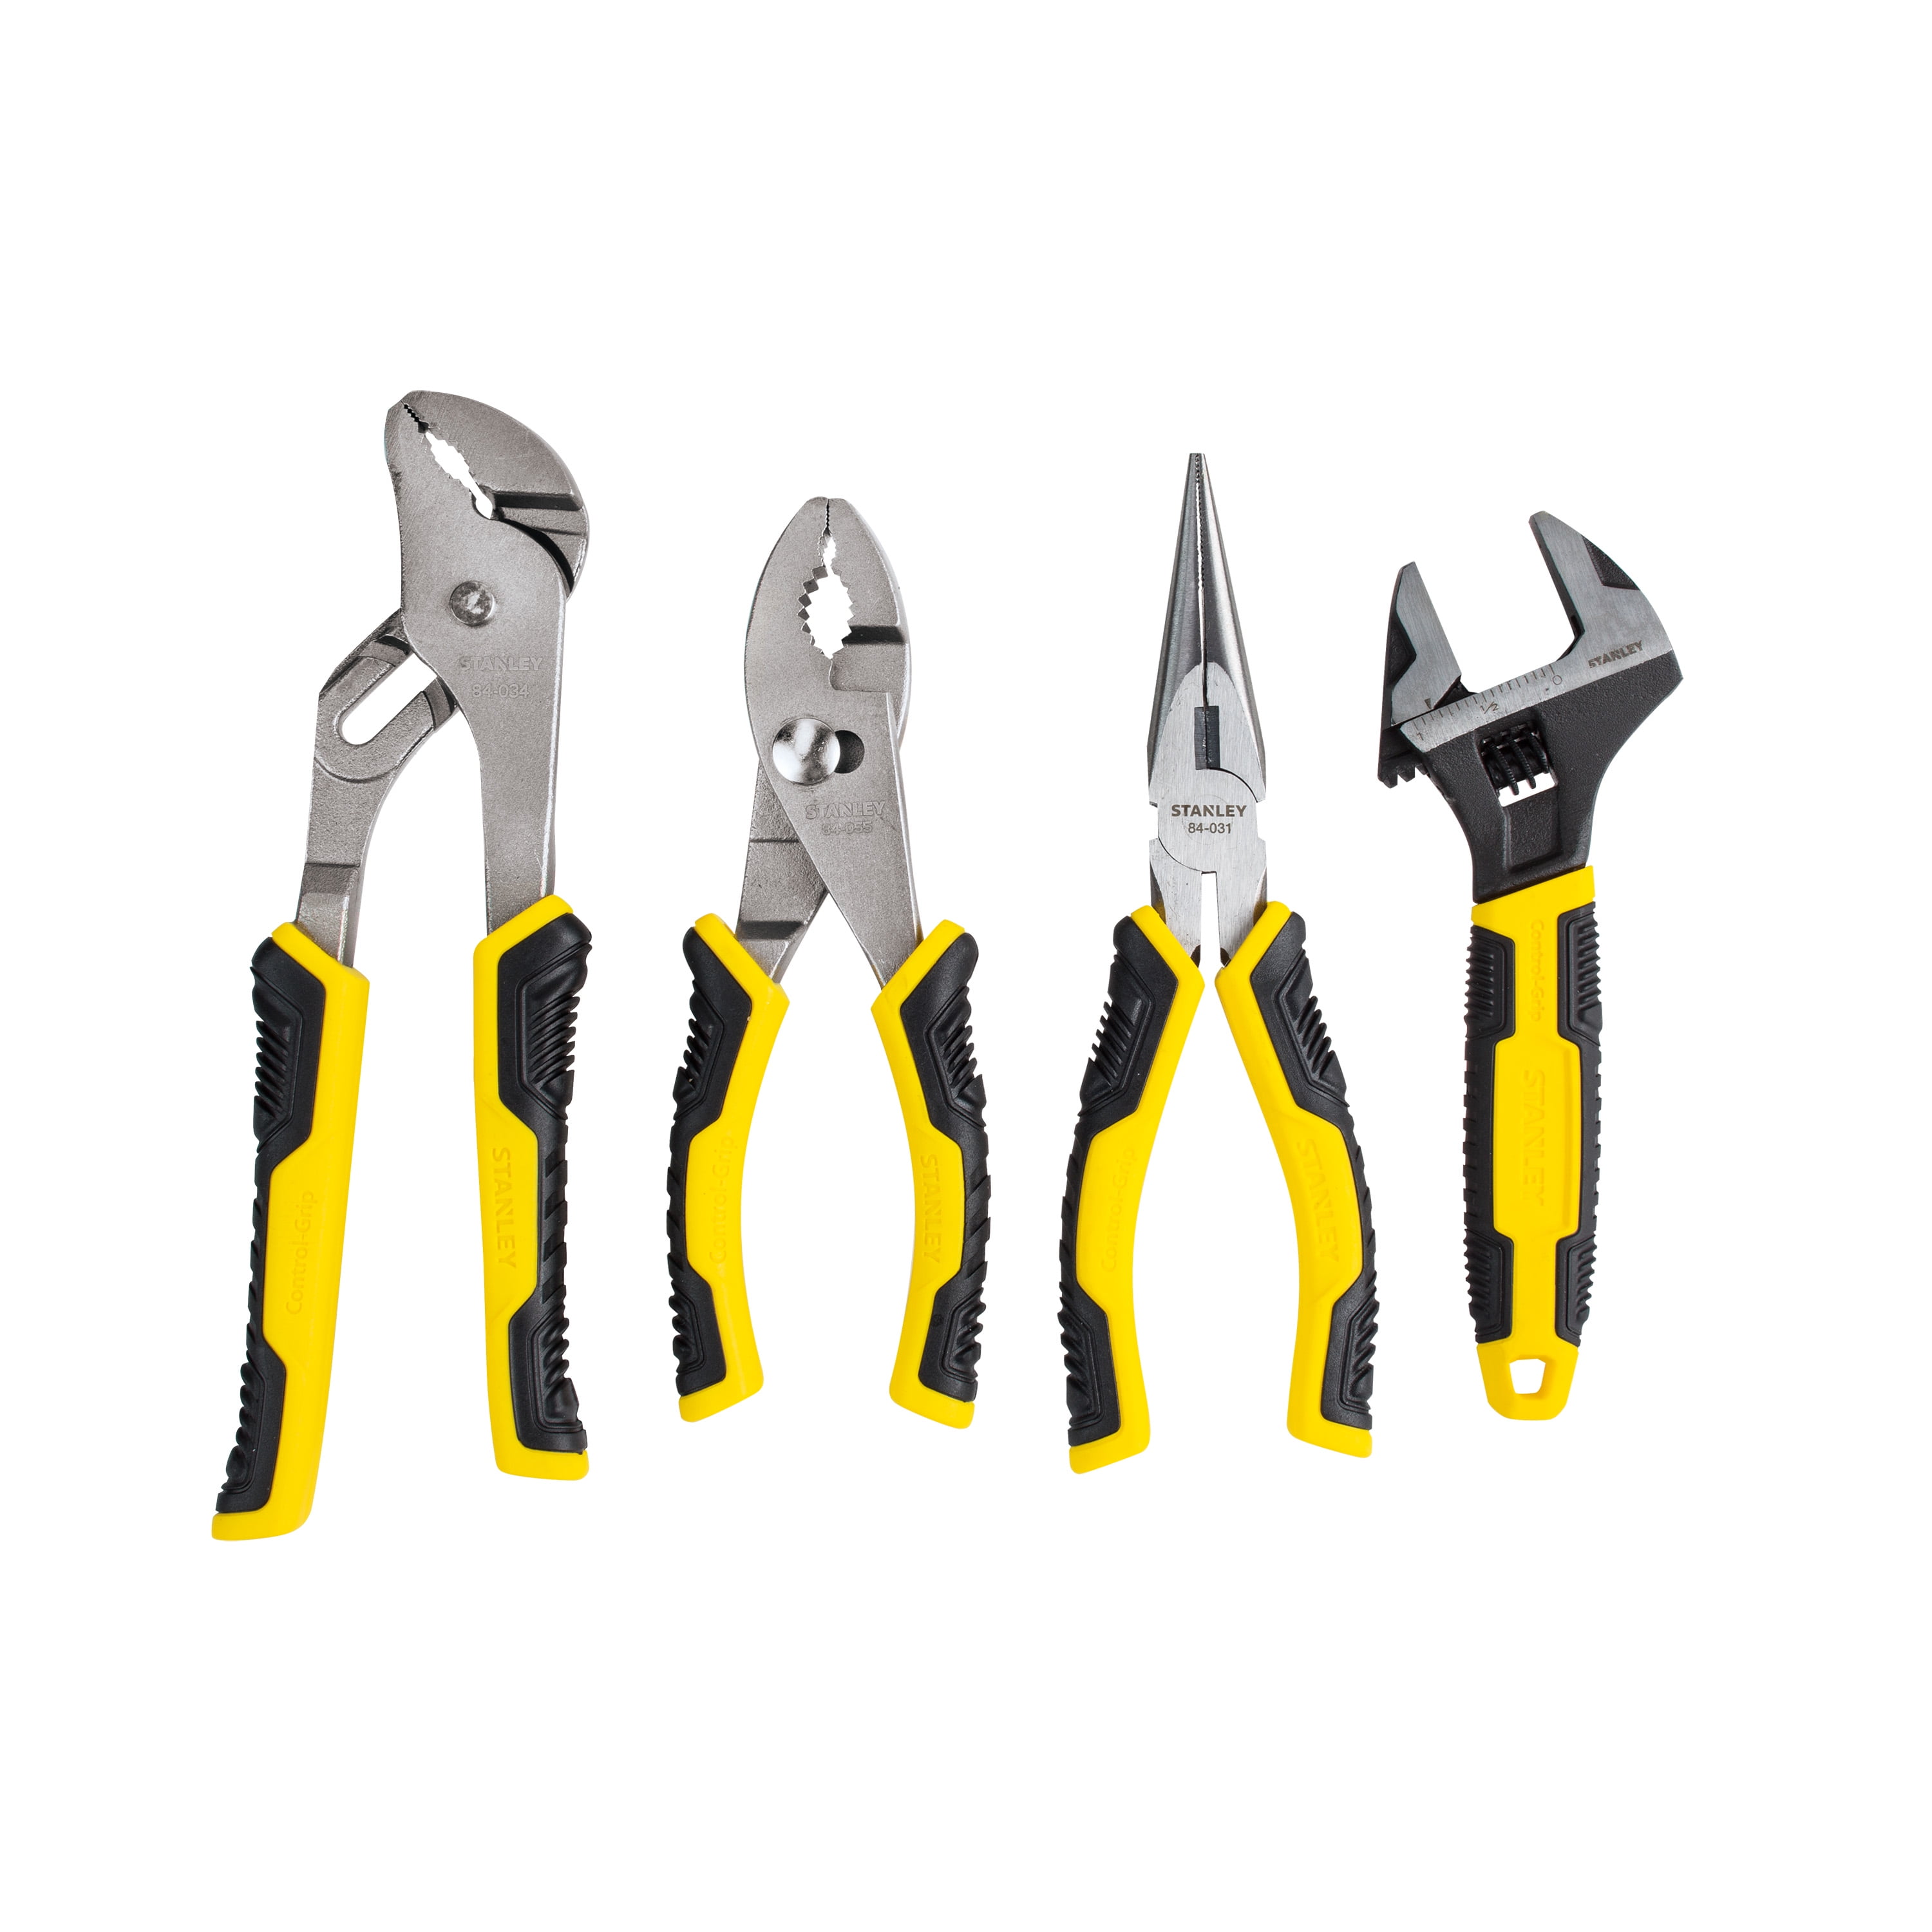 STANLEY Plier Adjustable and Tool Sets 4-Piece Wrench Set 84-558